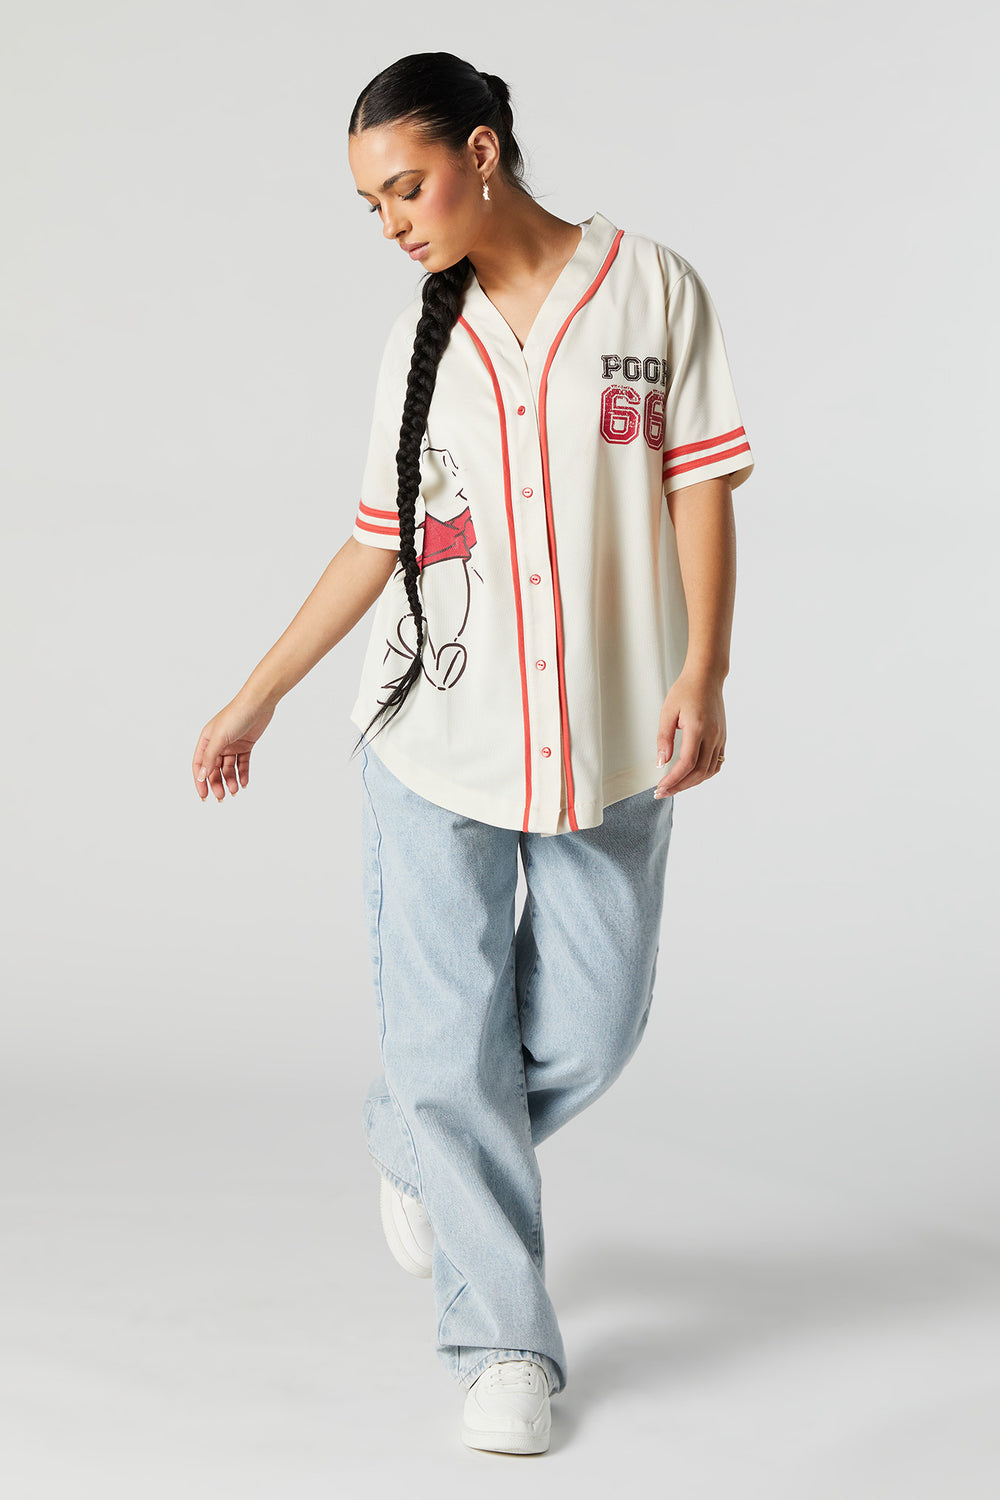 Pooh and Piglet Graphic Baseball Jersey Pooh and Piglet Graphic Baseball Jersey 3